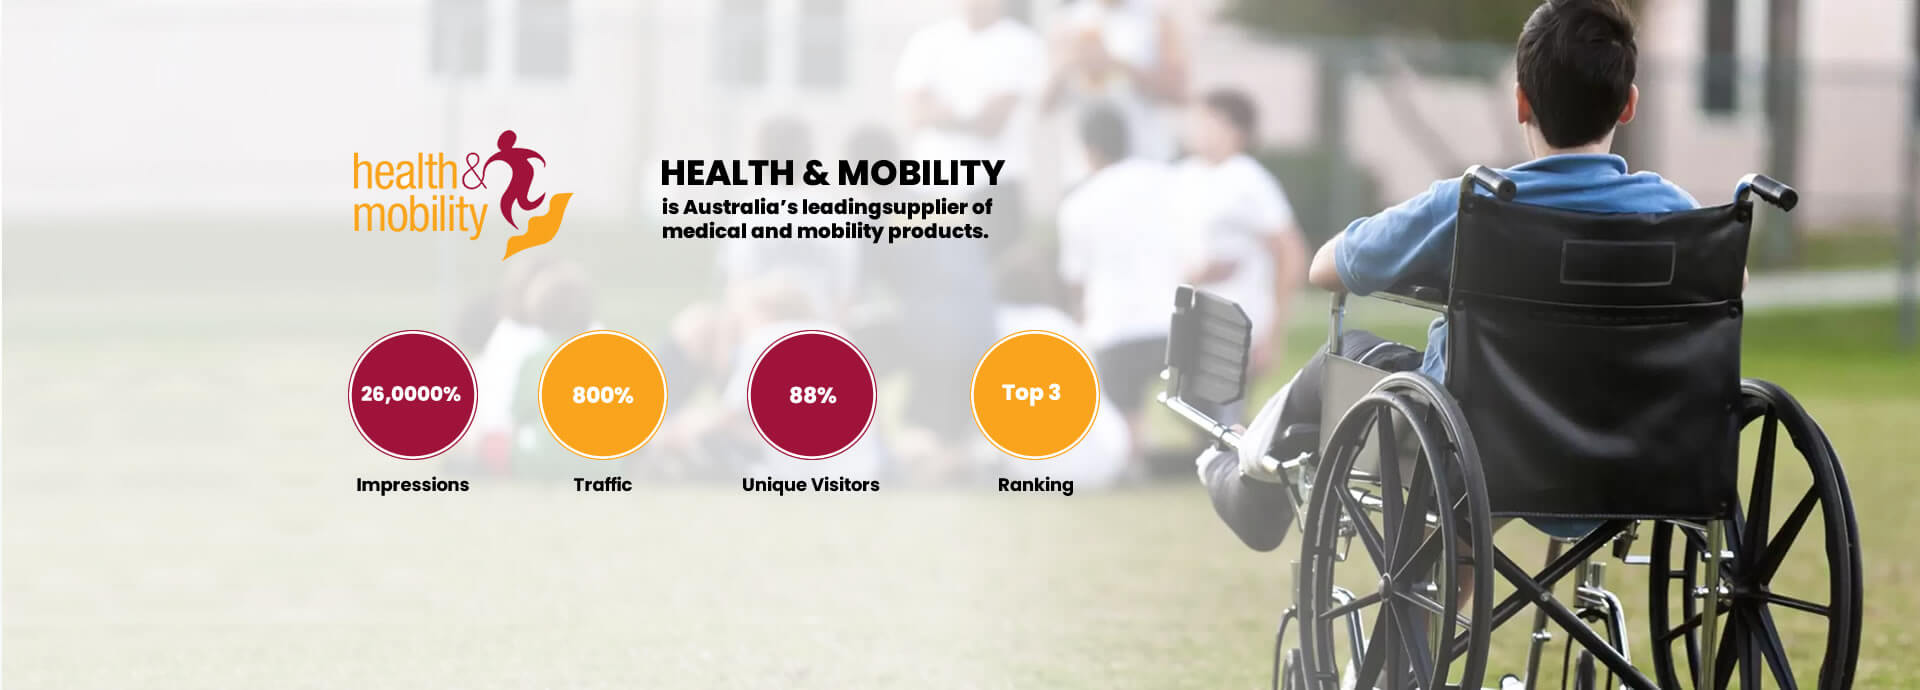 Health & Mobility